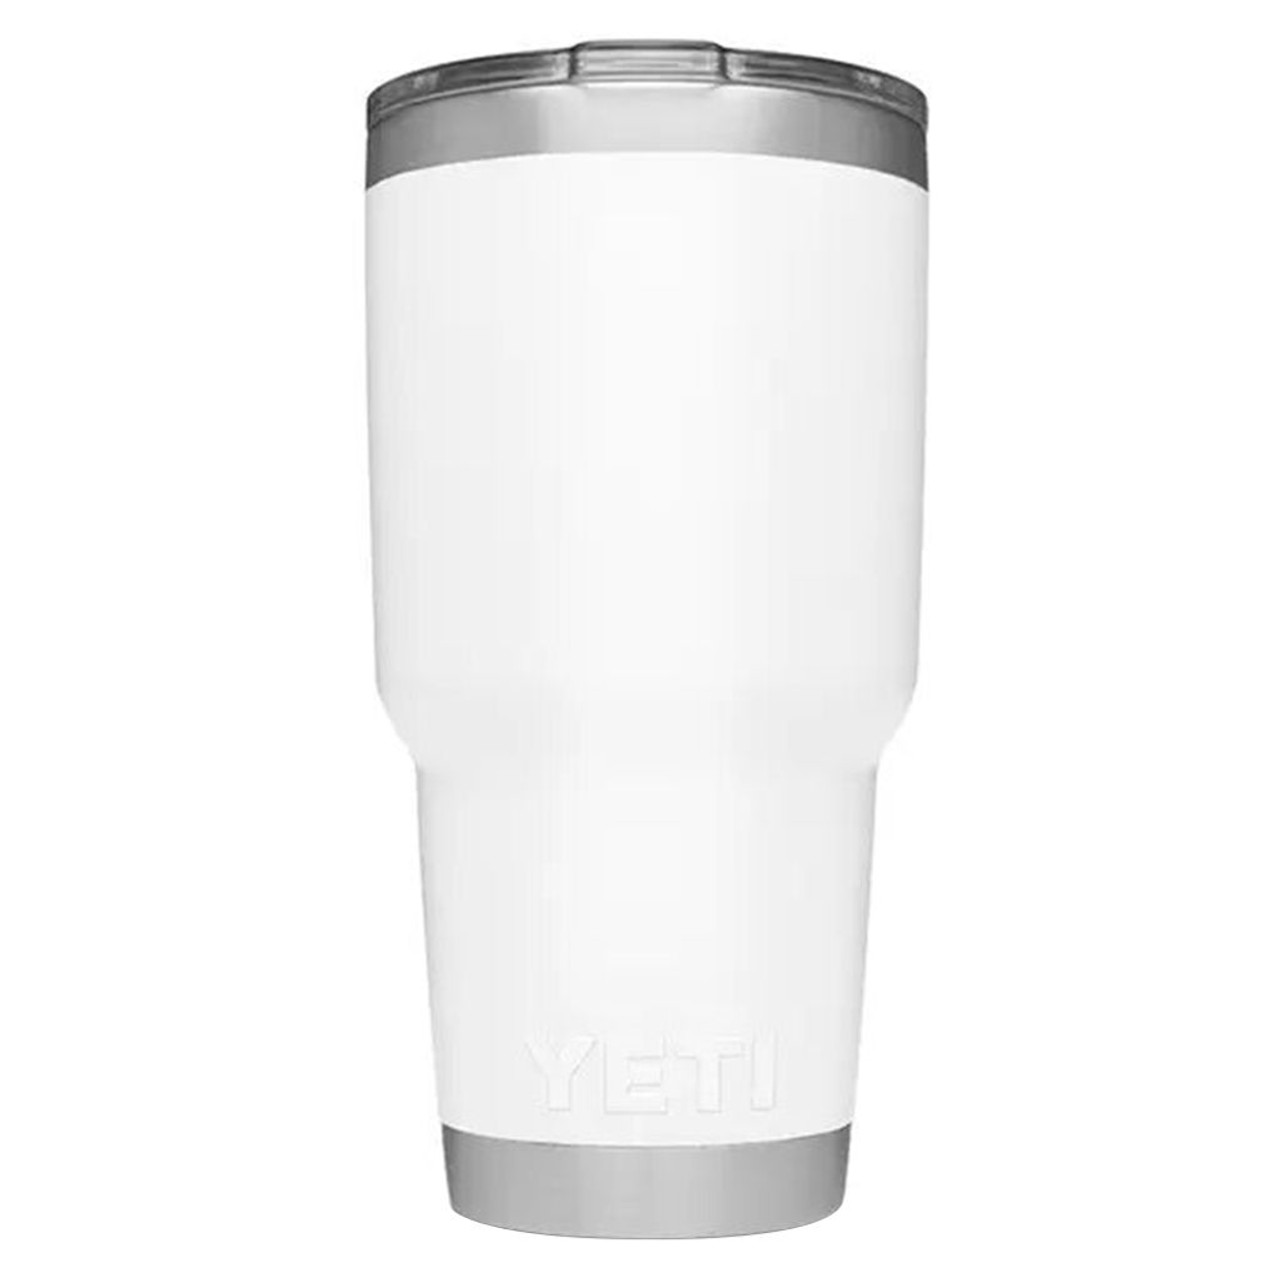 YETI Rambler Tumbler 30oz with Magslider Lid - Pacific Blue